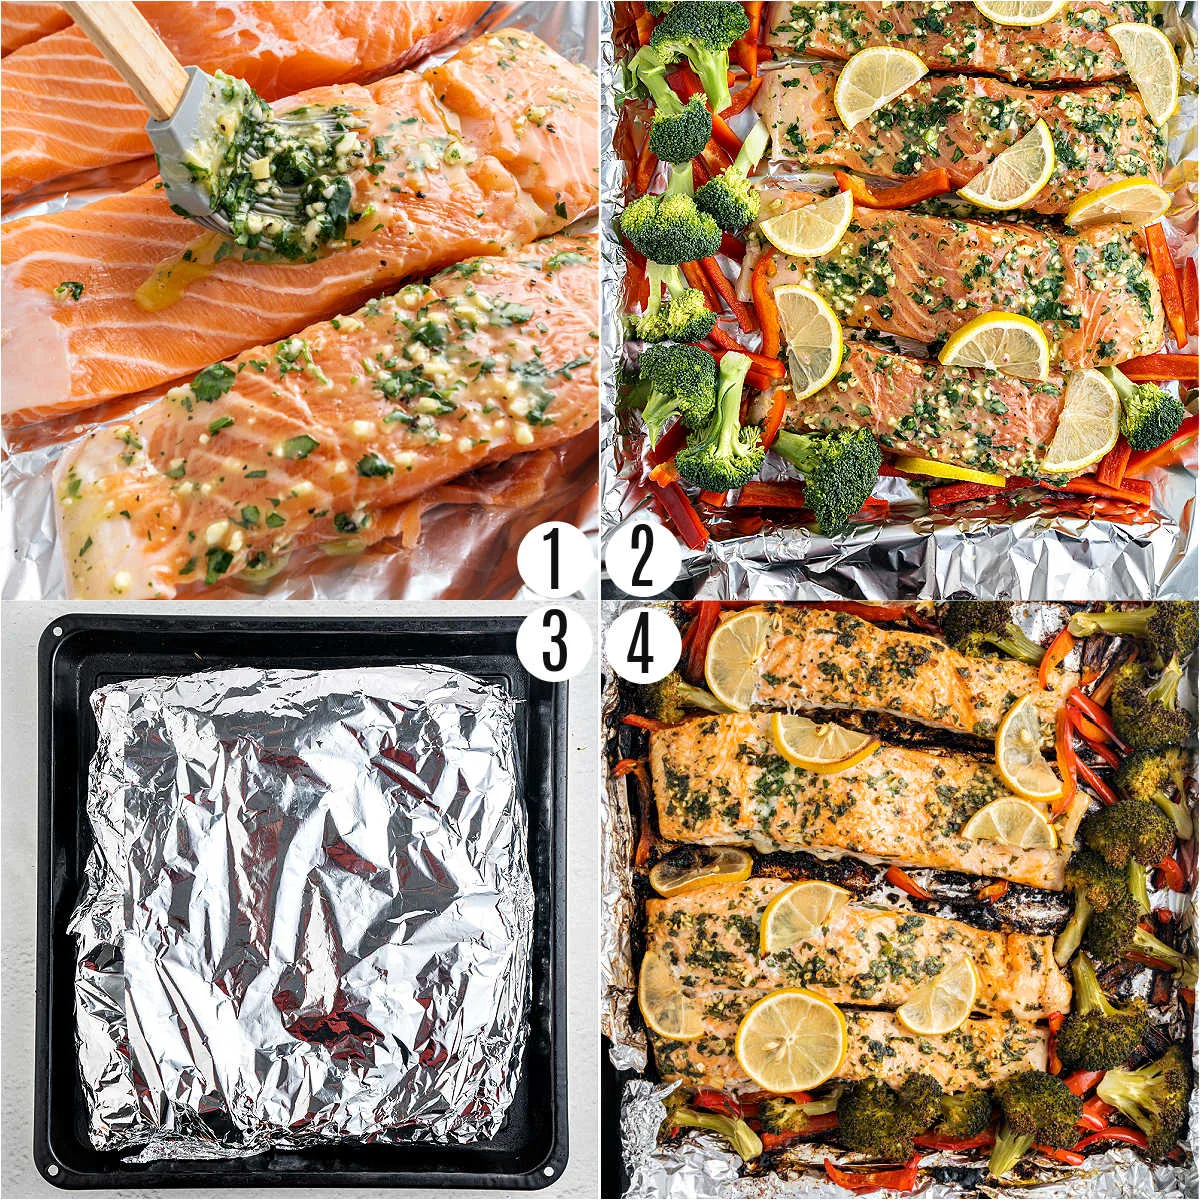 Step by step photos showing how to make sheet pan salmon.